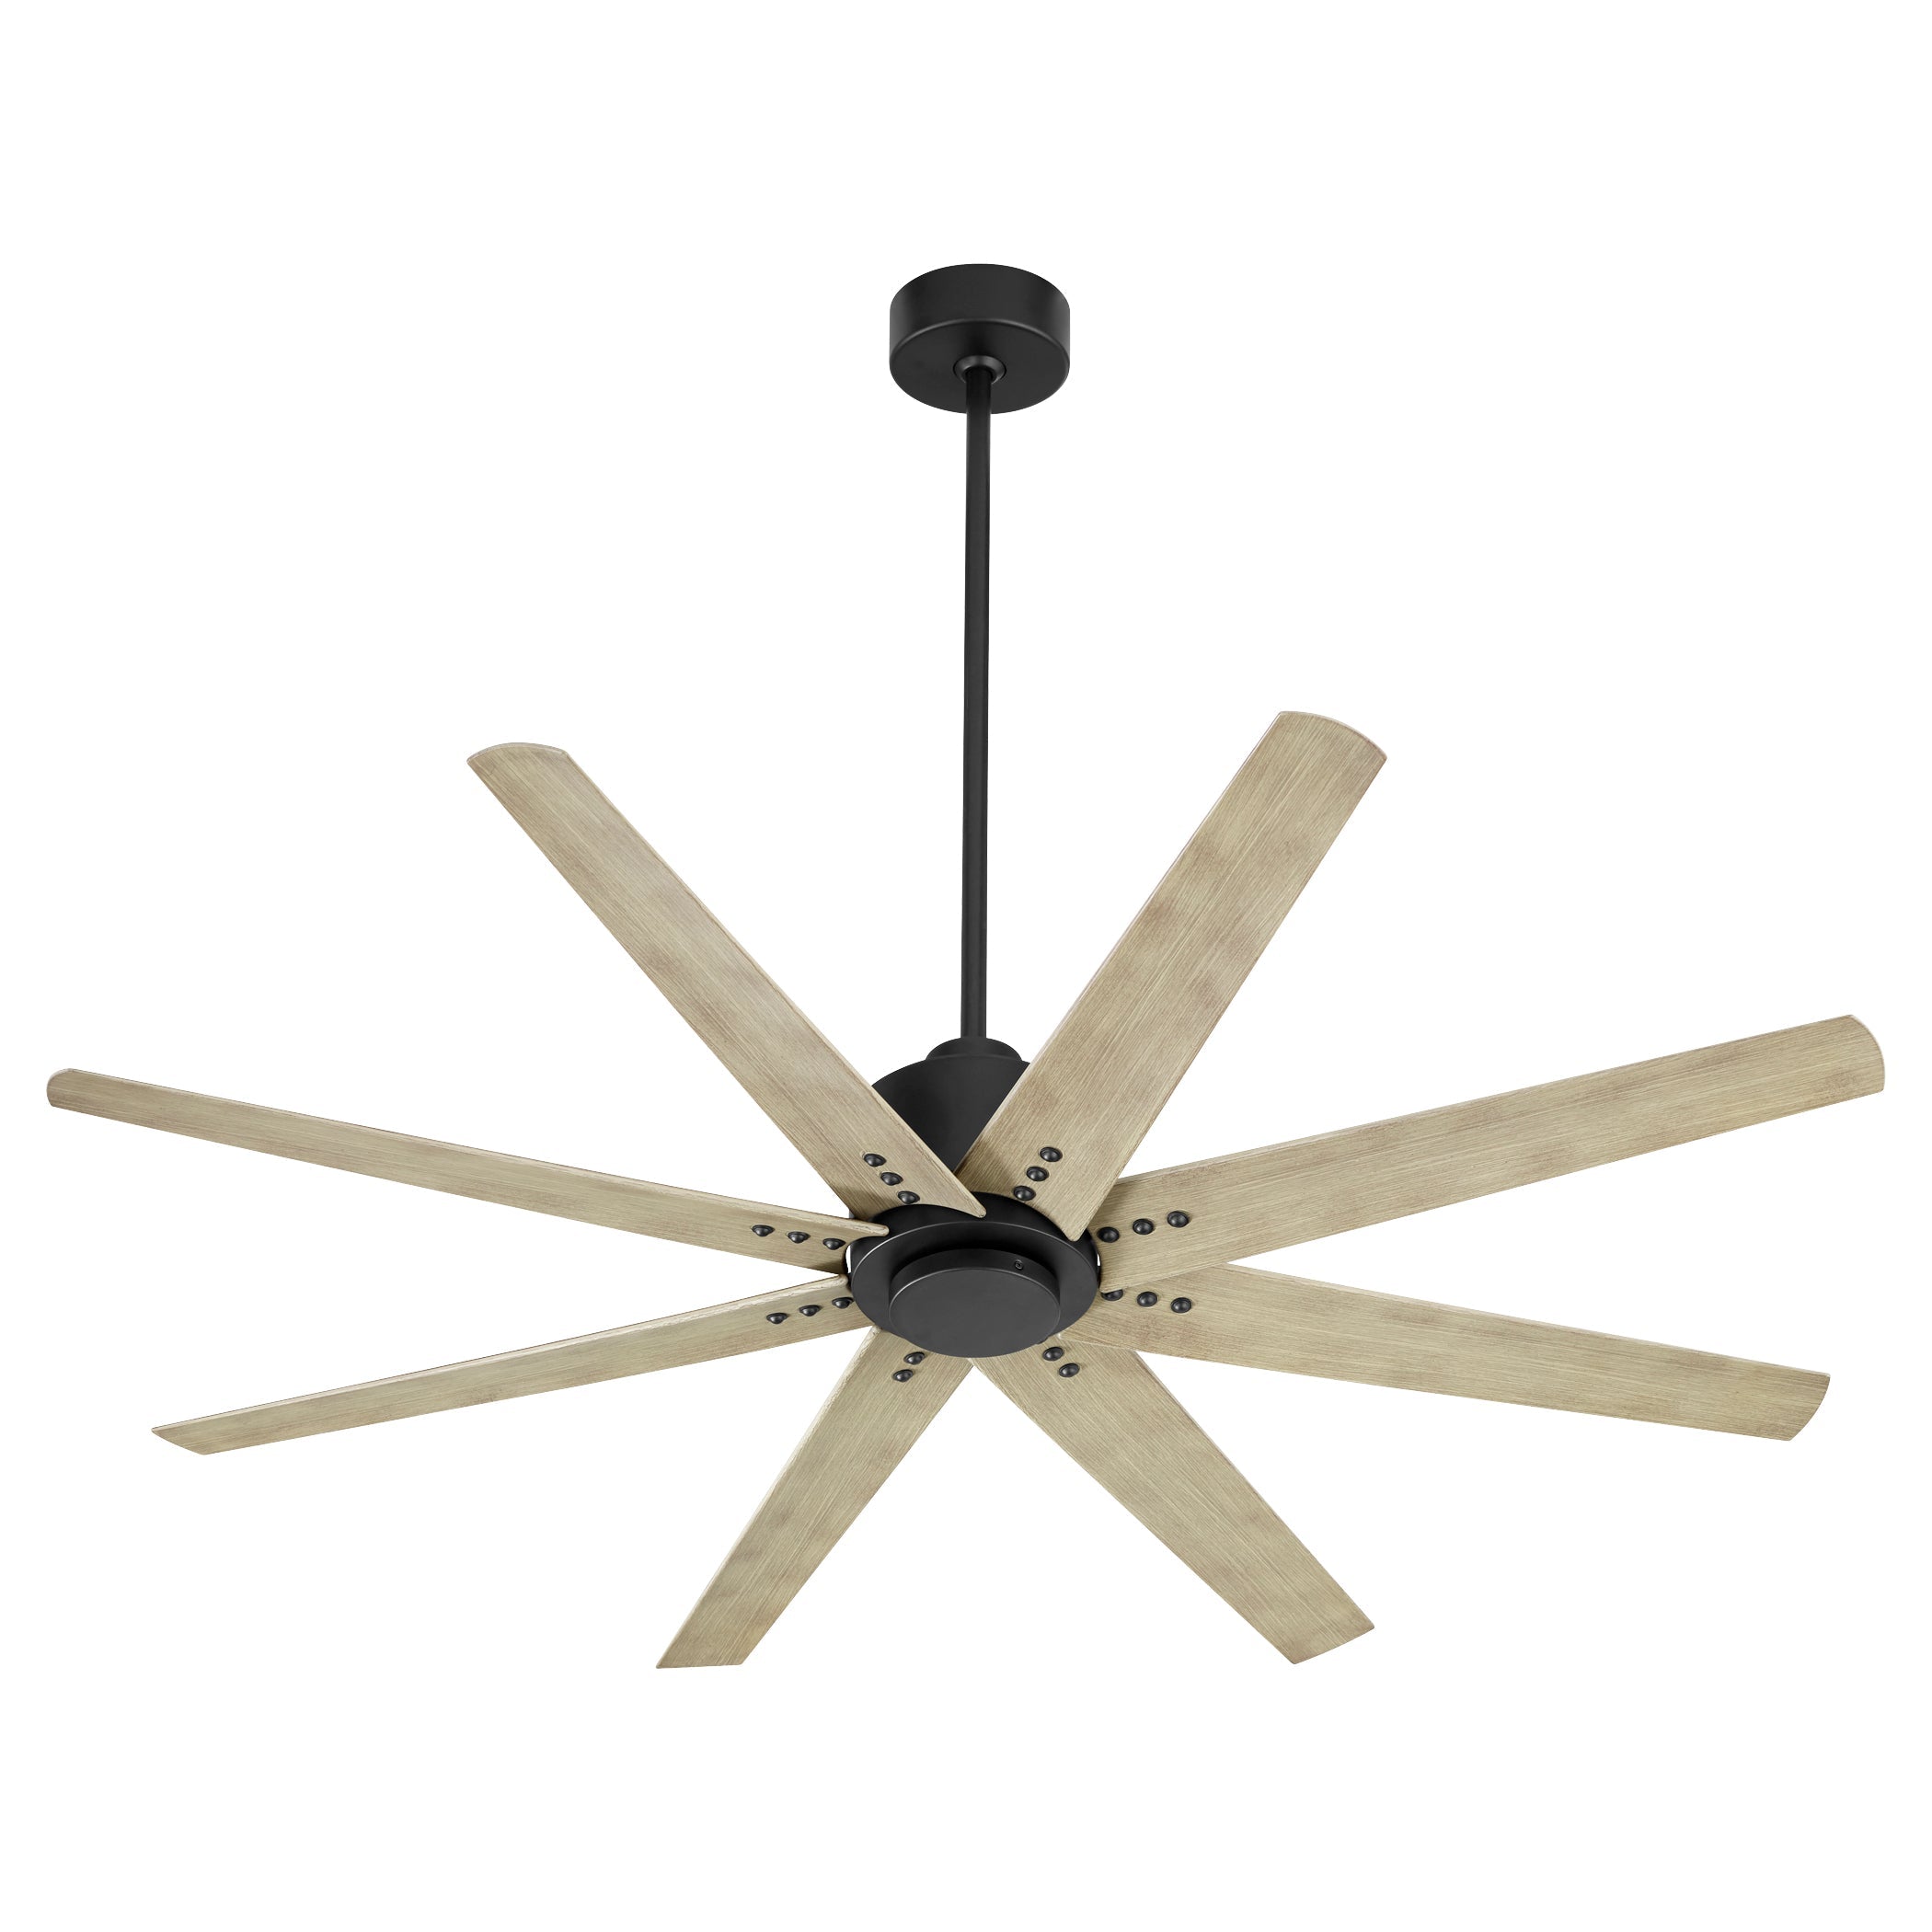 Oxygen Fleet 3-112-15 Ceiling Fan with Remote 56 Inch - Black, Weathered Gray